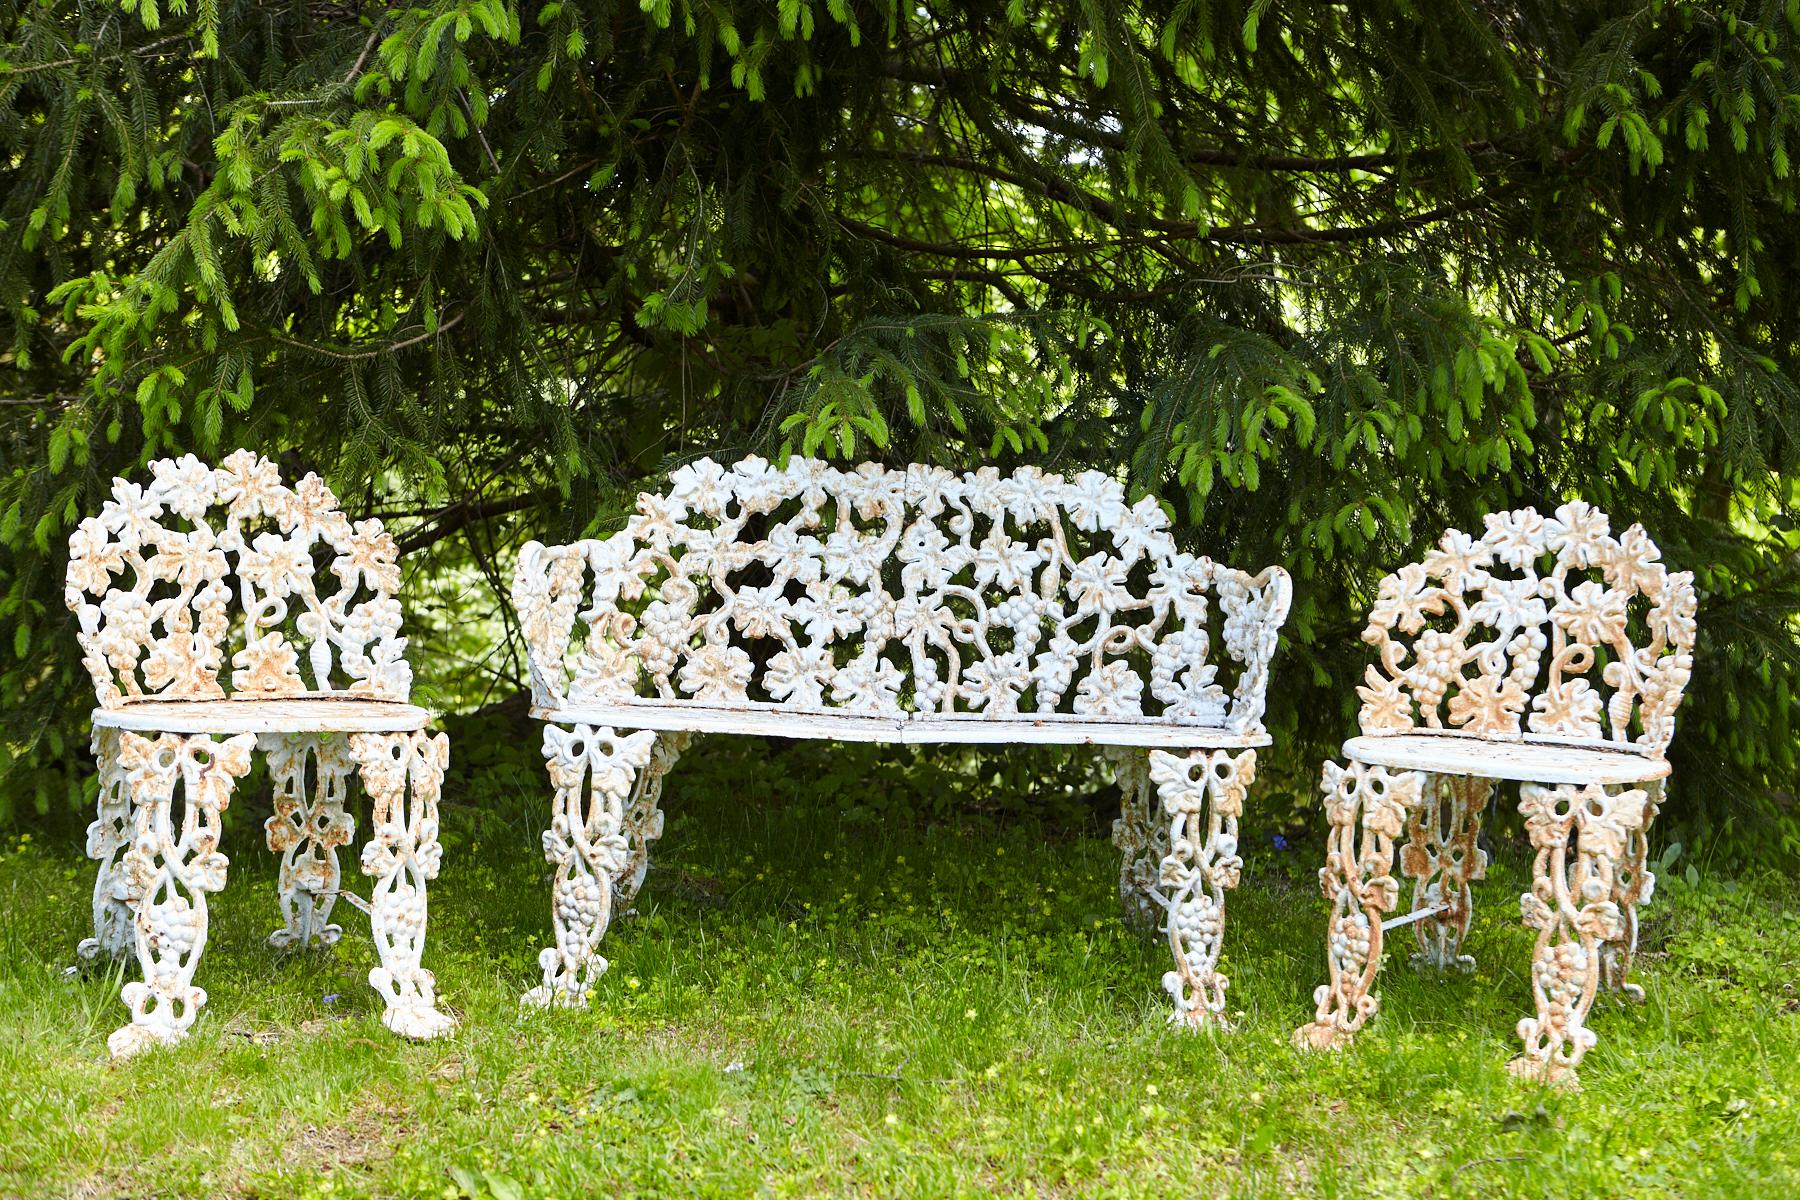 Heavy-duty white painted cast iron garden set, composed of a curved bench and two chairs with berry, leaf, and vine motifs. Bench, and chairs have some rust and moss area, which supports the lovely patina and wabi-sabi style look.
Bench: W 38 x D